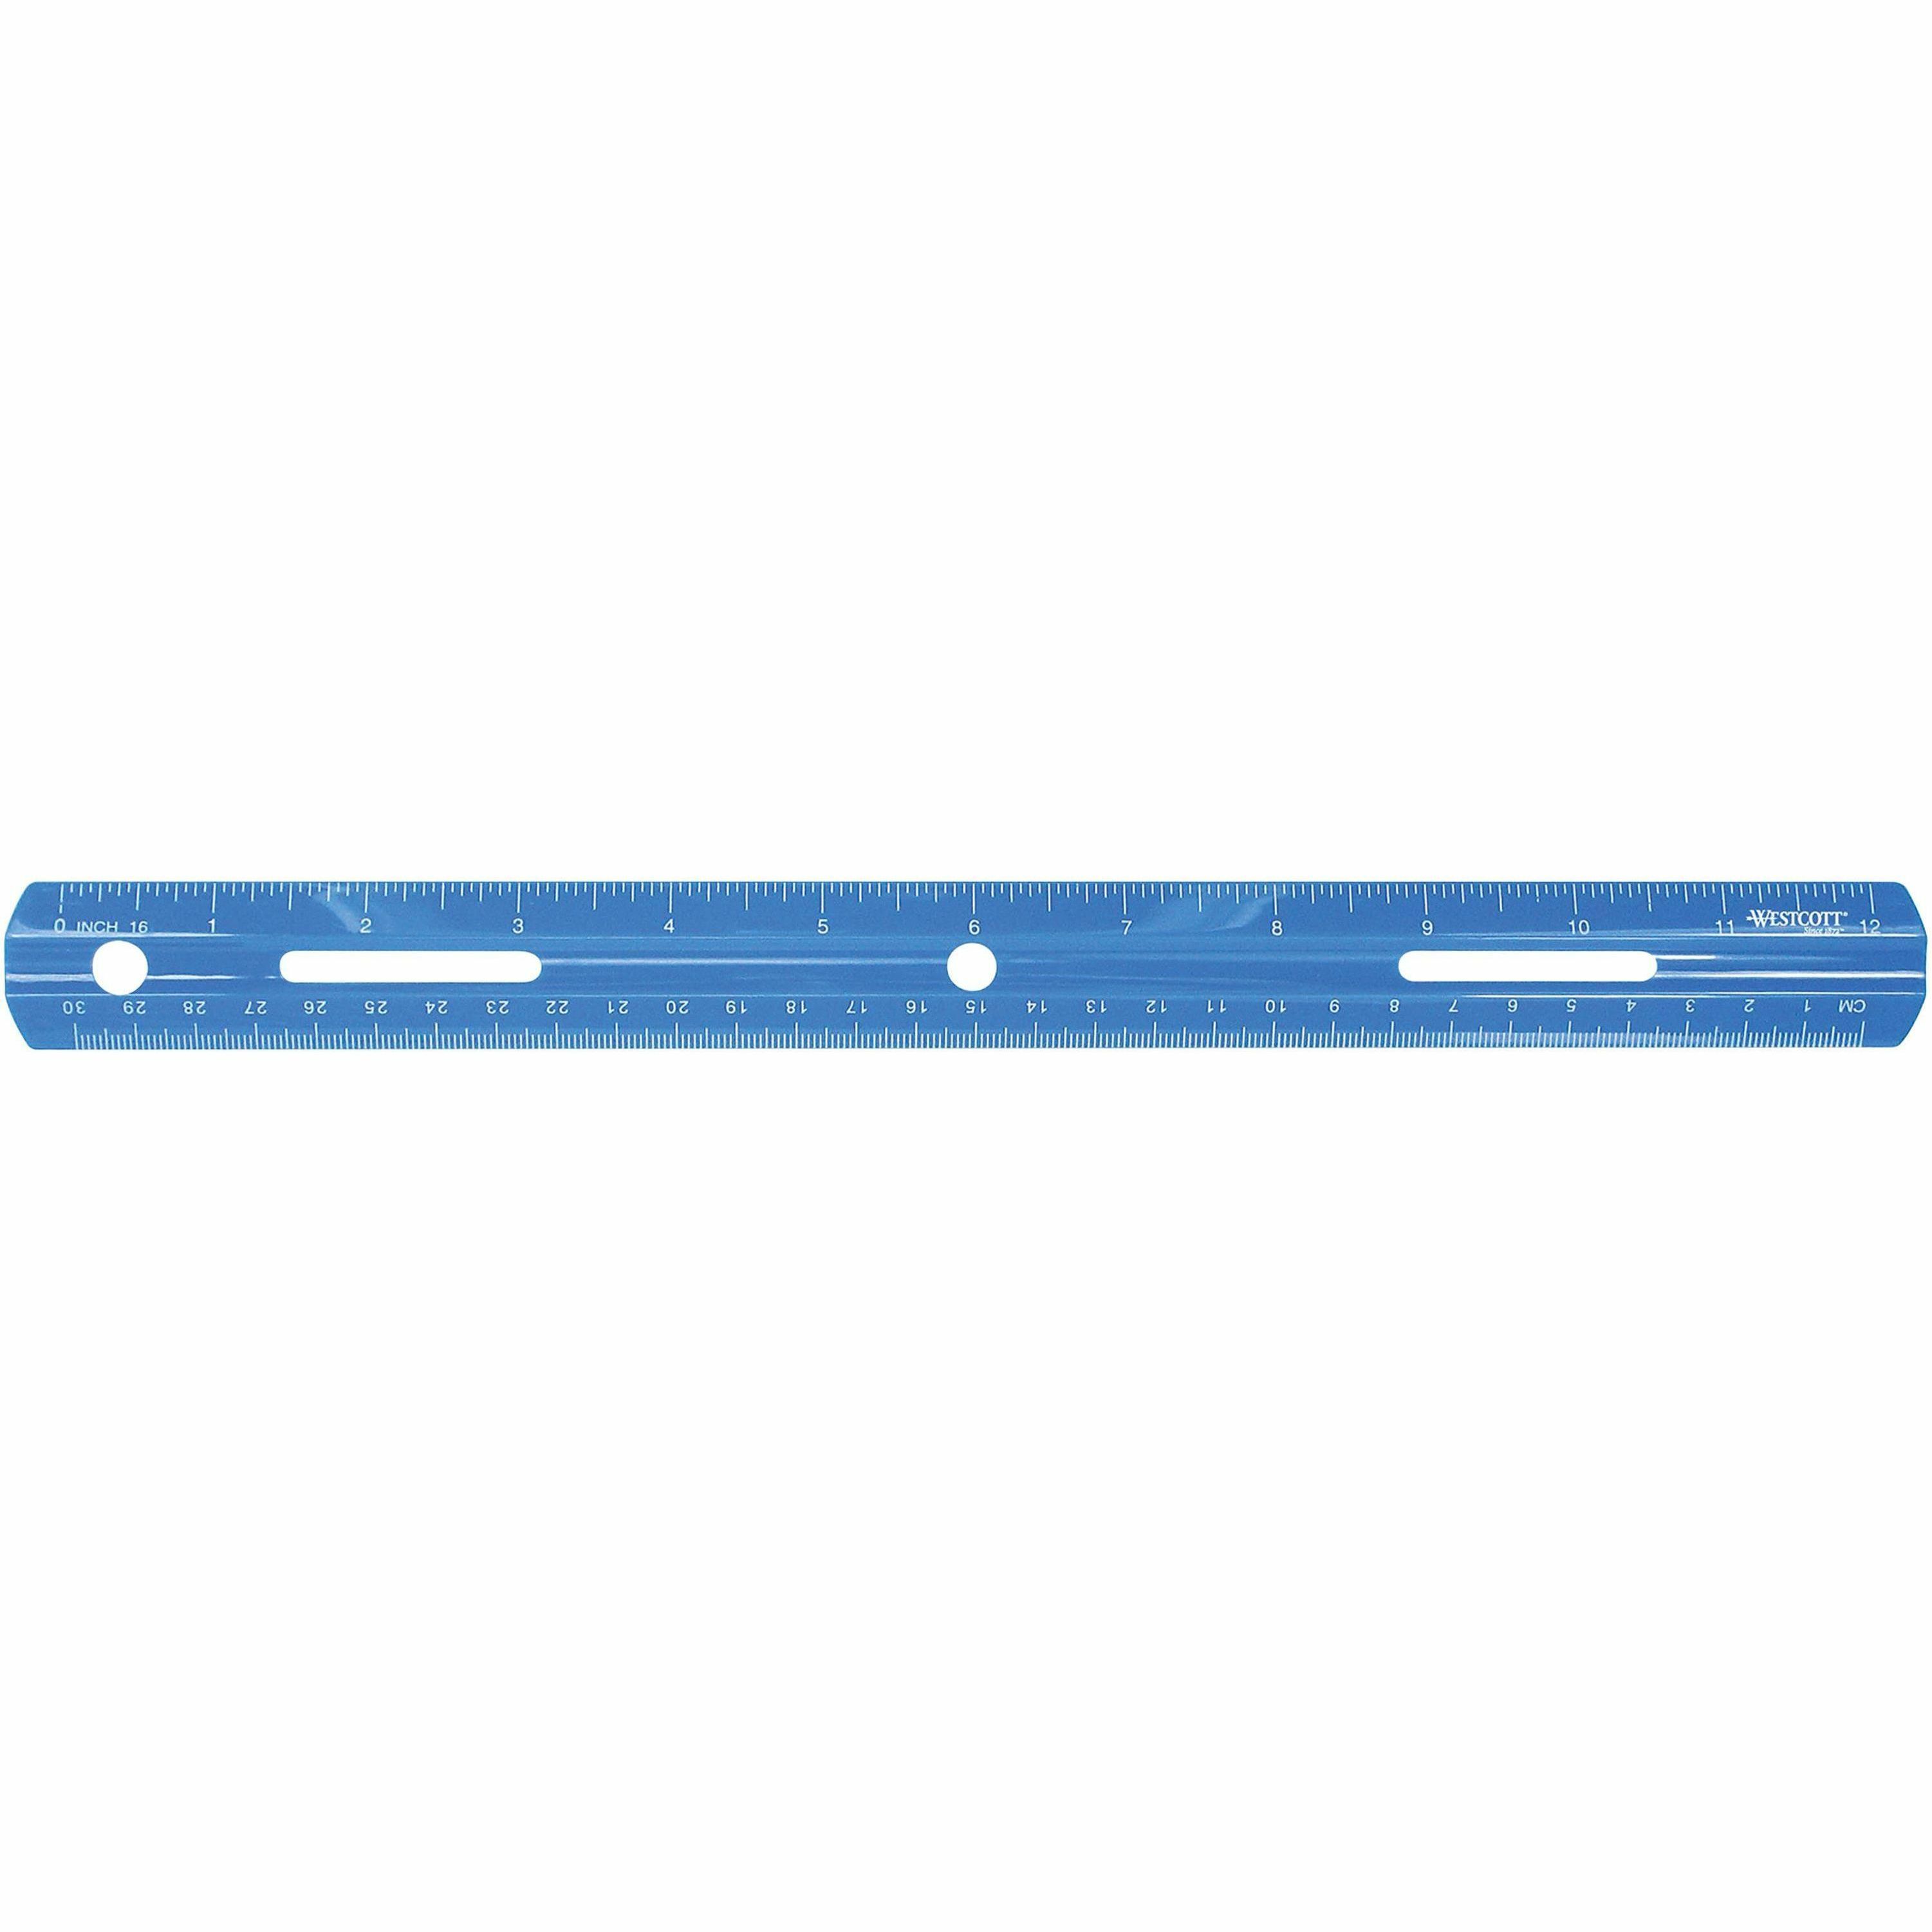 18 in. Stiff Ruler Features 1/16 in. and mm graduations, Durable stainless  steel